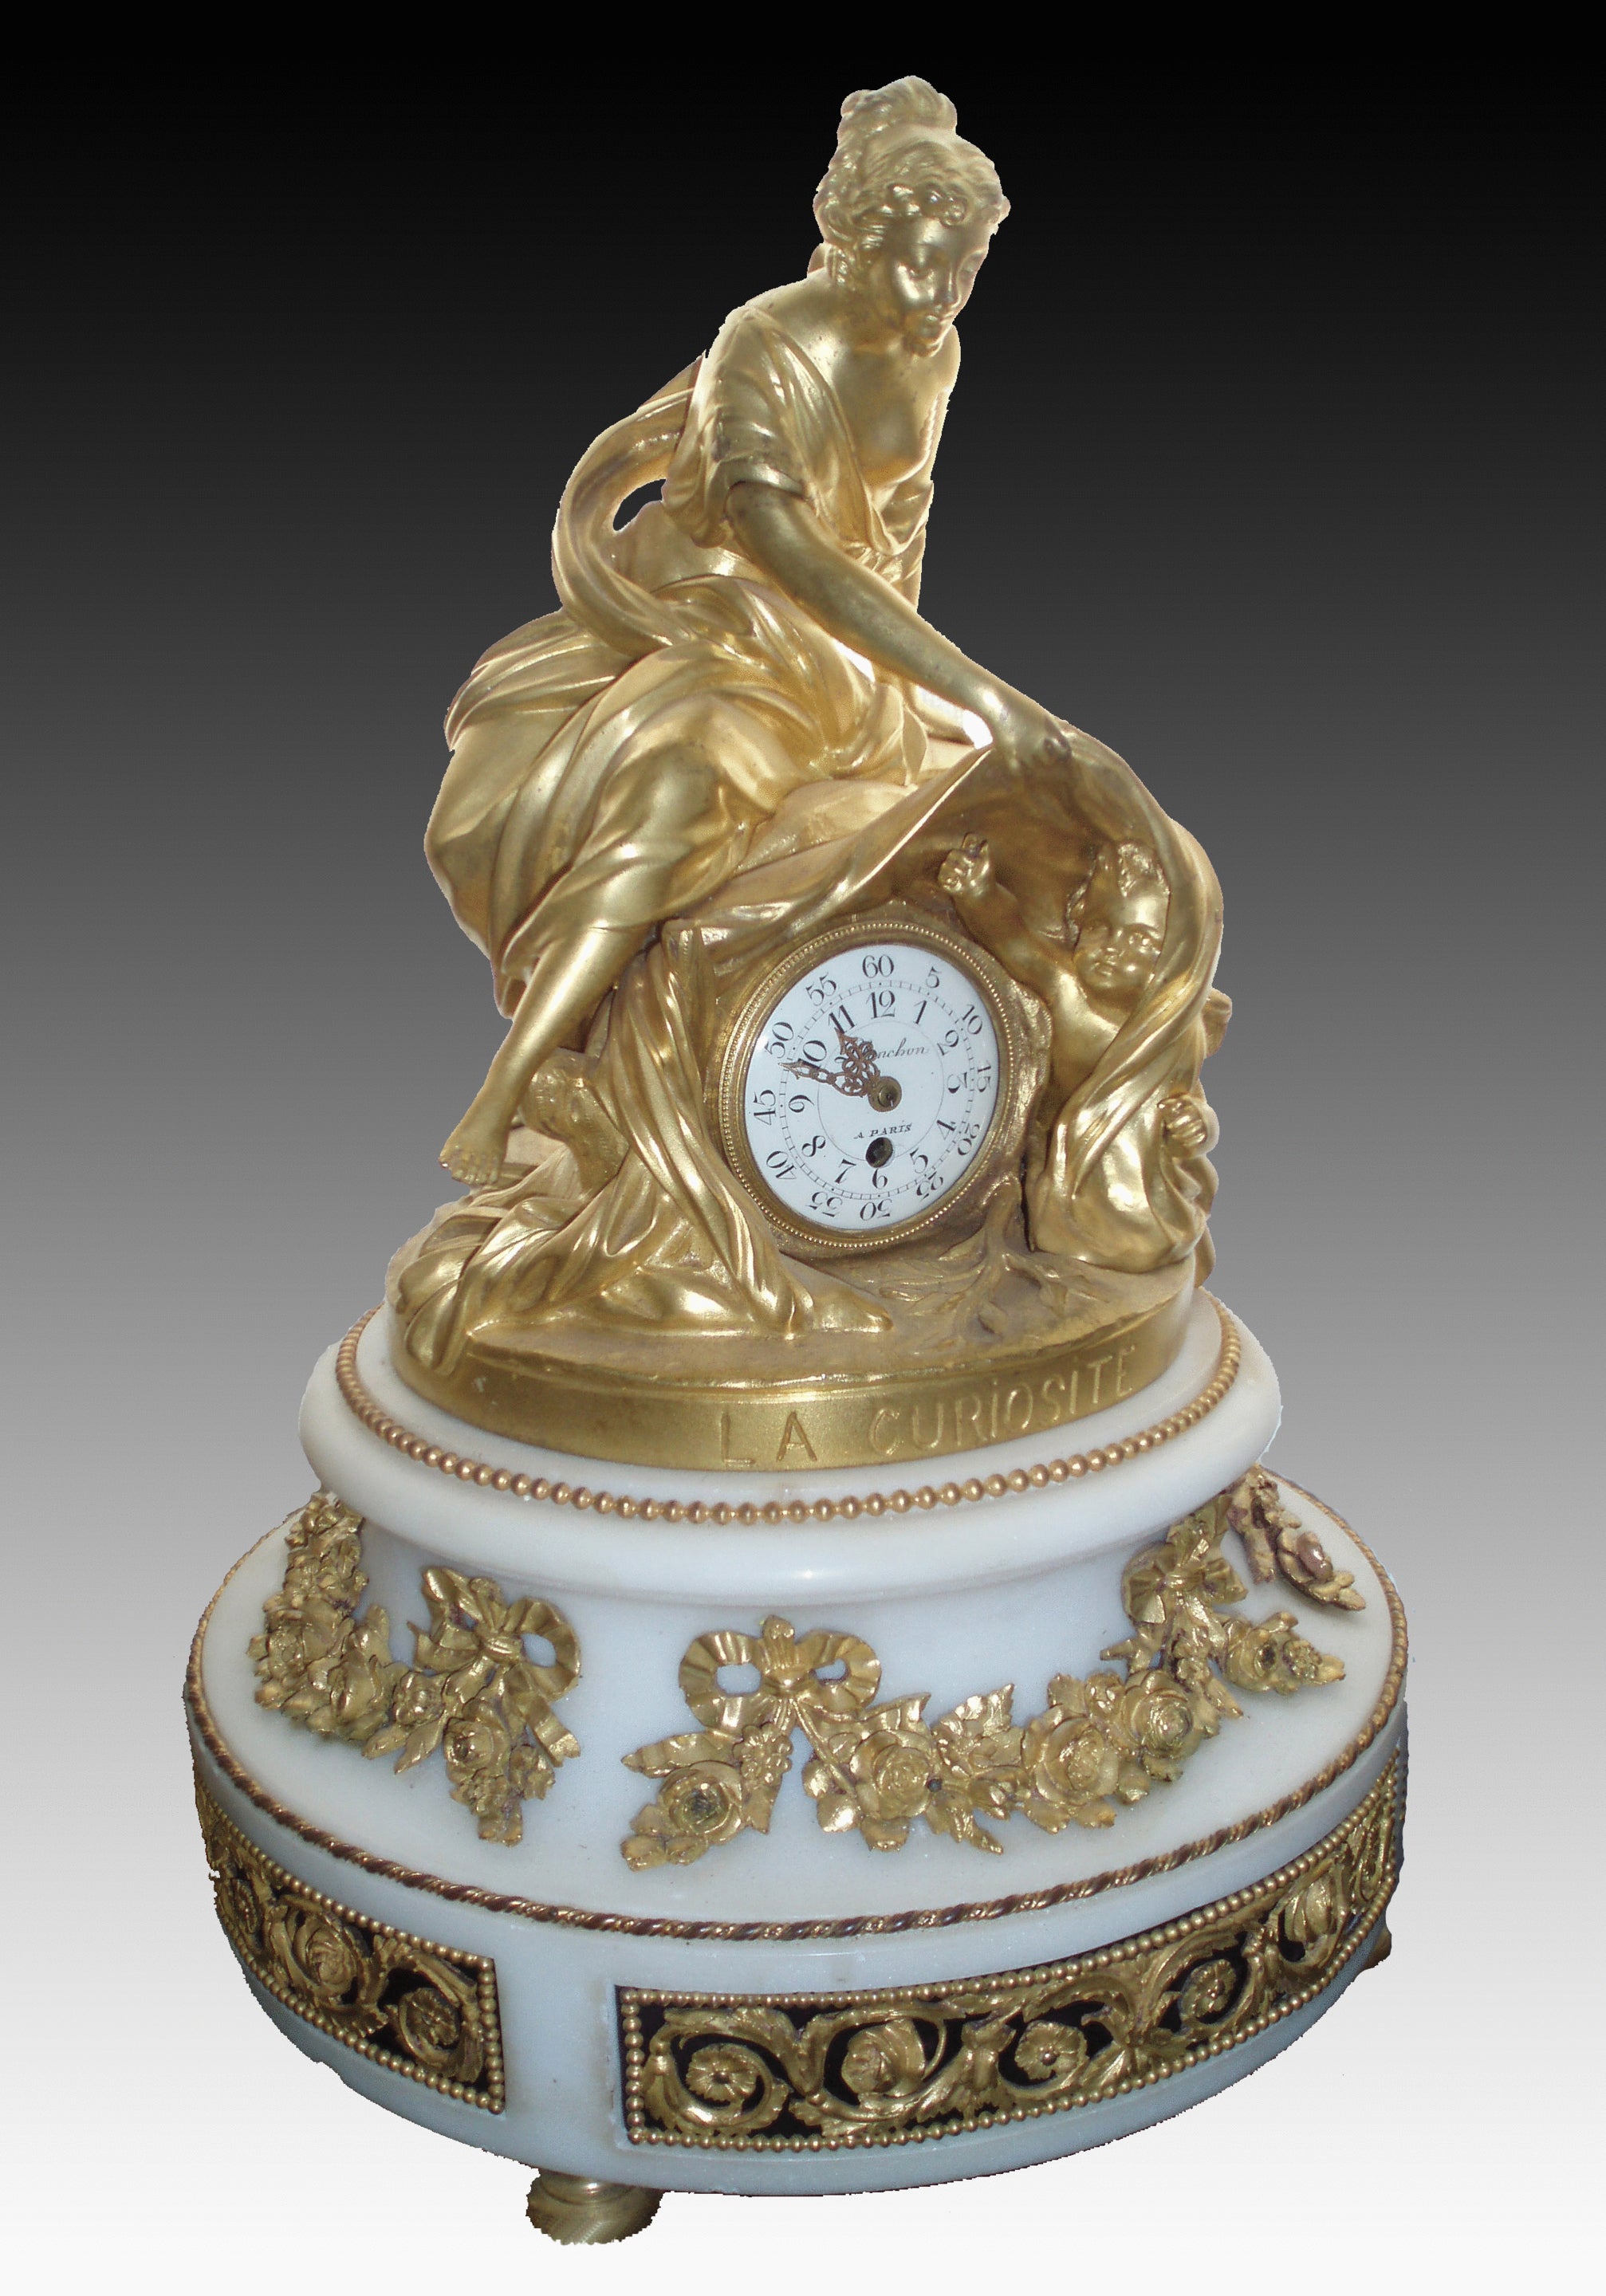 A gilt bronze and marble figural clock in the Louis XVI style